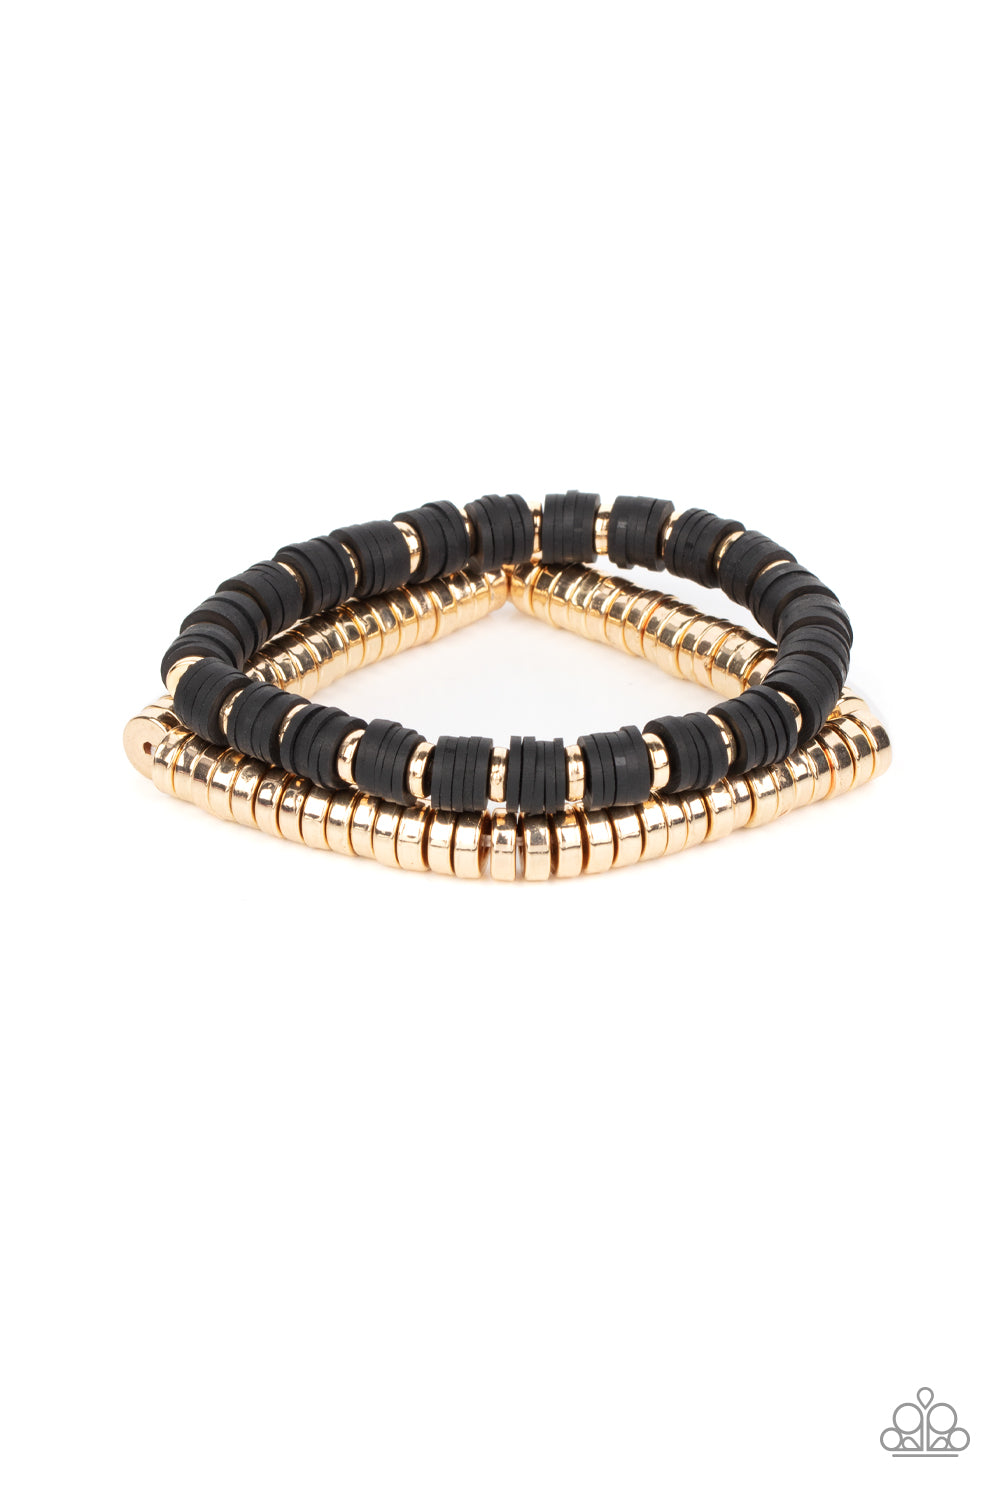 Catalina Marina - Black Stretchy Bracelets infused with stretchy bands, a row of gold disc beads joins a strand of rubbery black and gold discs around the wrist, resulting in a modern duo.  Sold as one pair of bracelets.